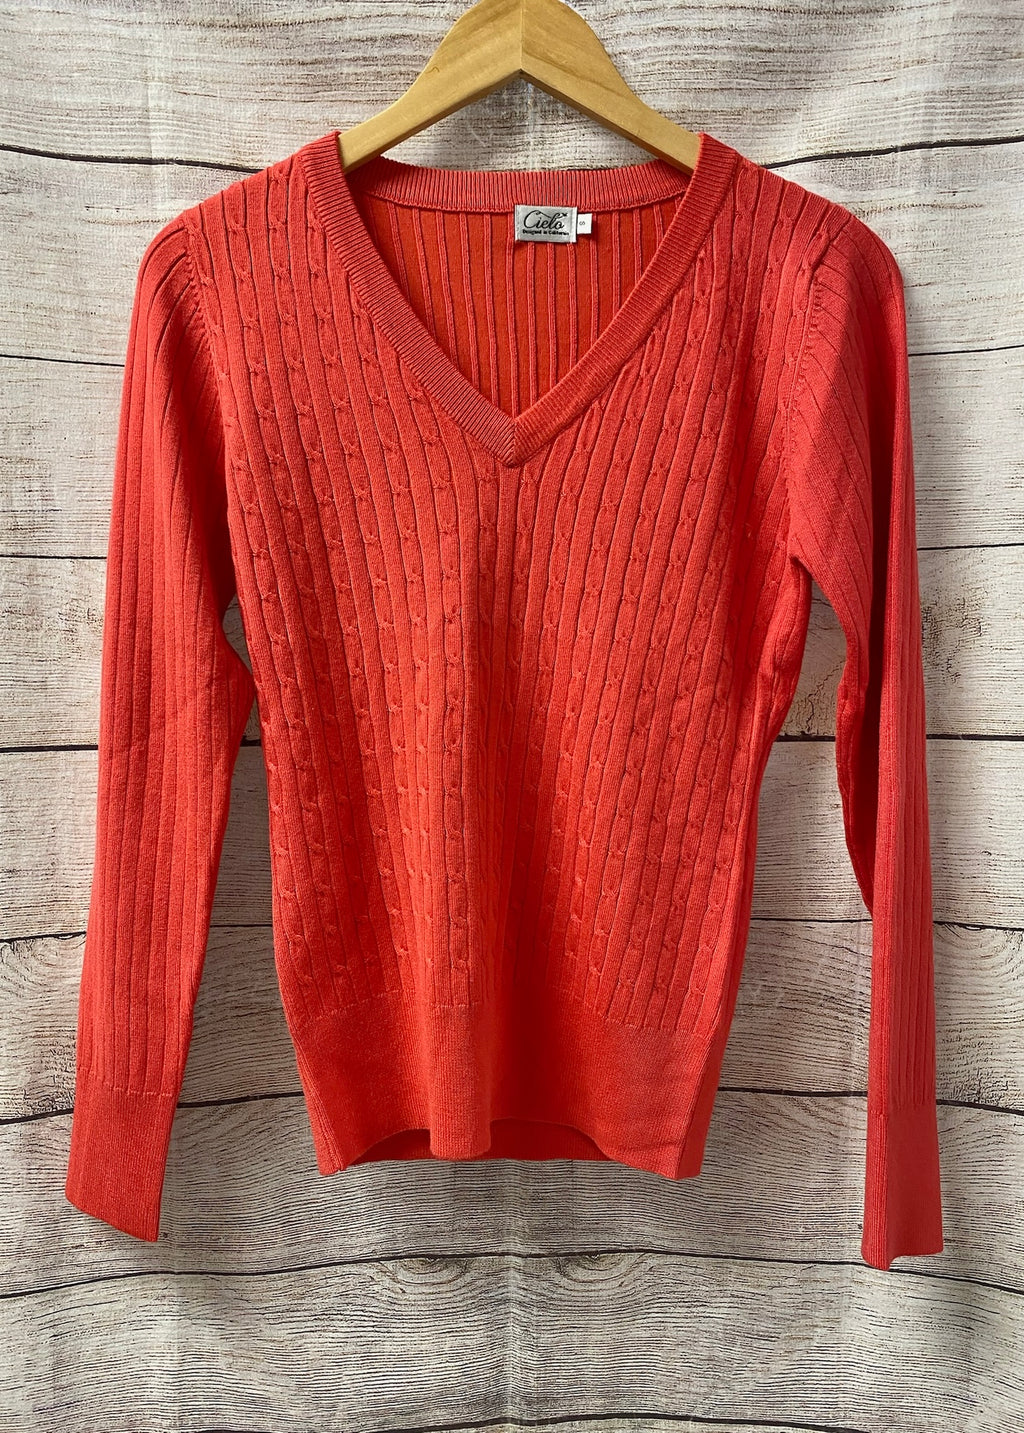 Knit Ribbed Sweater